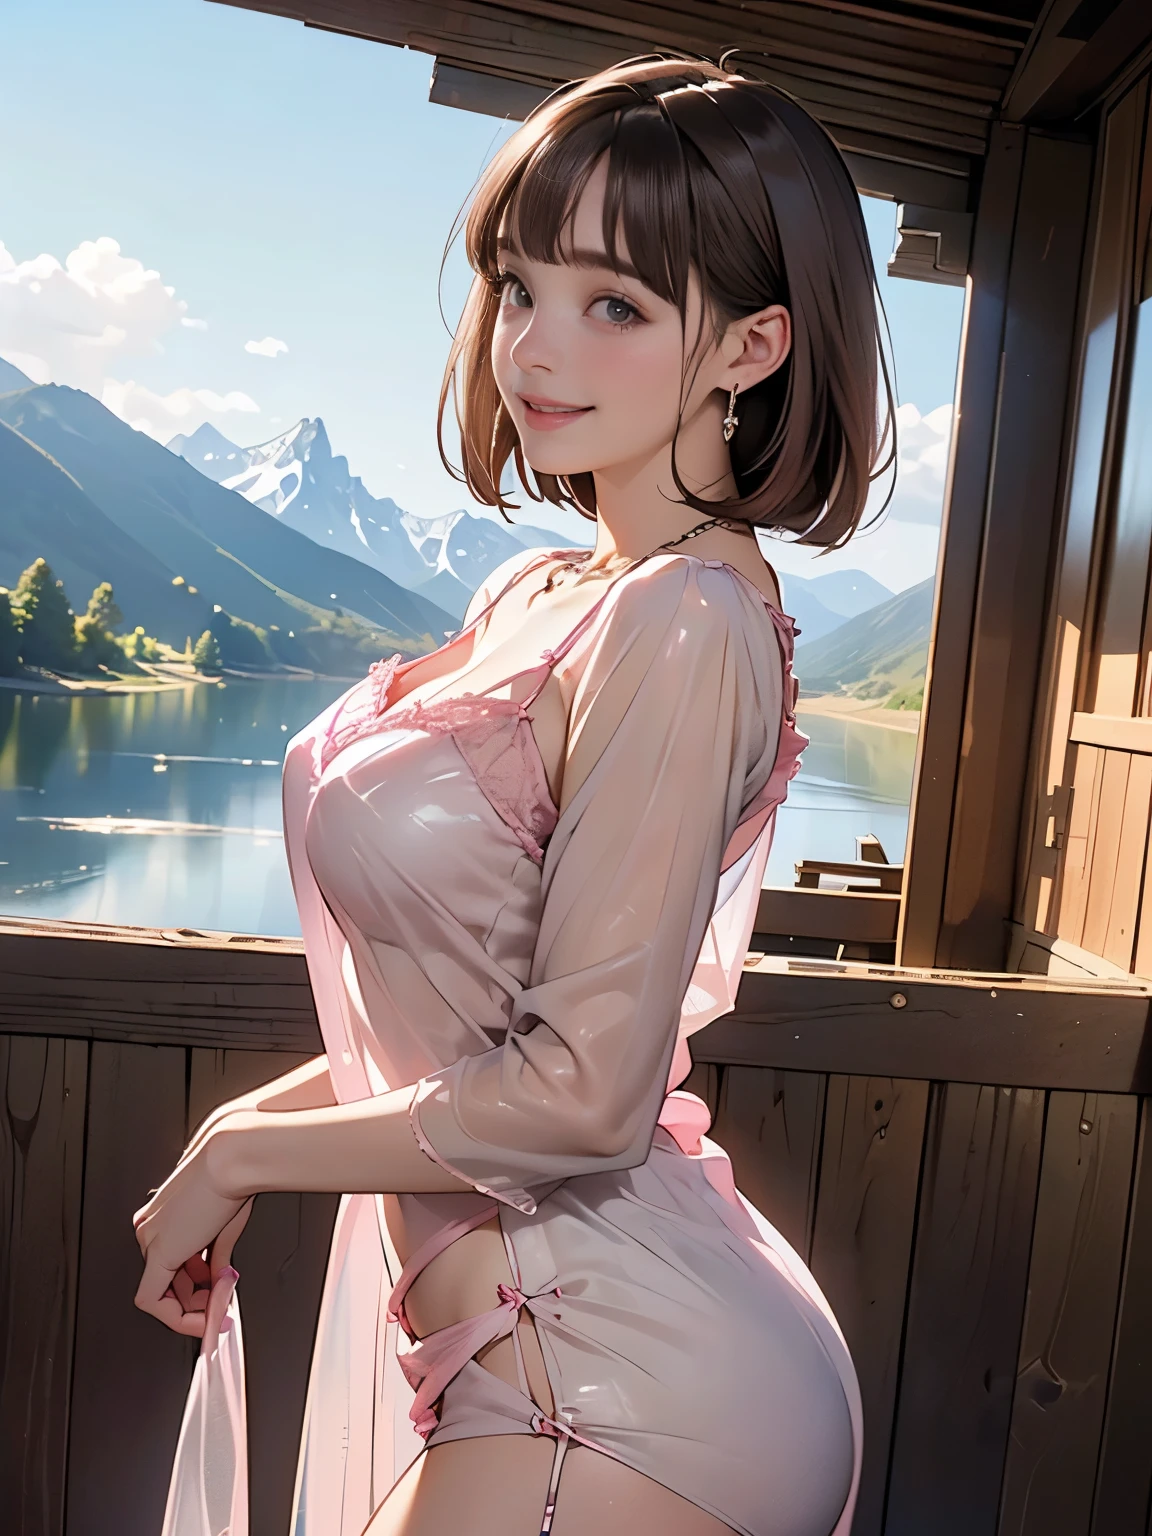 ((((highest quality))))、(((Ultra-precision CG16K wallpaper)))、(((masterpiece)))、(((Super detailed)))、(((Extreme detail)))、(((１Mature 32 year old woman:1.8)))、((Very beautiful Japanese faces))、((Shiraishi Mai:1.5))、((Straight Bob Hair、blunt bangs:1.5))、(Shiny brown hair)、Beautiful delicate eyes、eyeliner、eye shadow、Brown eyes、High nose、Small nostrils、Small Mouth、Seductive lips、Beautiful breasts、((C cup size breasts))、Cleavage、Voluptuous body、eight-headed body、Perfect proportions、Perfect Anatomy、Perfect composition、Beautiful detailed shading、Beautiful, natural lighting、Beautiful detail glow、Depth of written boundary、(((High chroma)))、(((Real:1.9)))、((vivid:1.5))、((Beautiful Skin))、((Skin Texture))、((Realistic skin feel))、(((Cowboy Shot:1.6)))、((Front view、Front low angle:1.6))、((Shy laugh:1.5))、(The woman is facing this way:1.5)、Bright daylight、Natural light、(((Lakeside with mountain view:1.5)))、(Standing pose:1.5)、(((Pink see-through negligee:1.6)))、((Earrings、Wearing a necklace:1.3))、